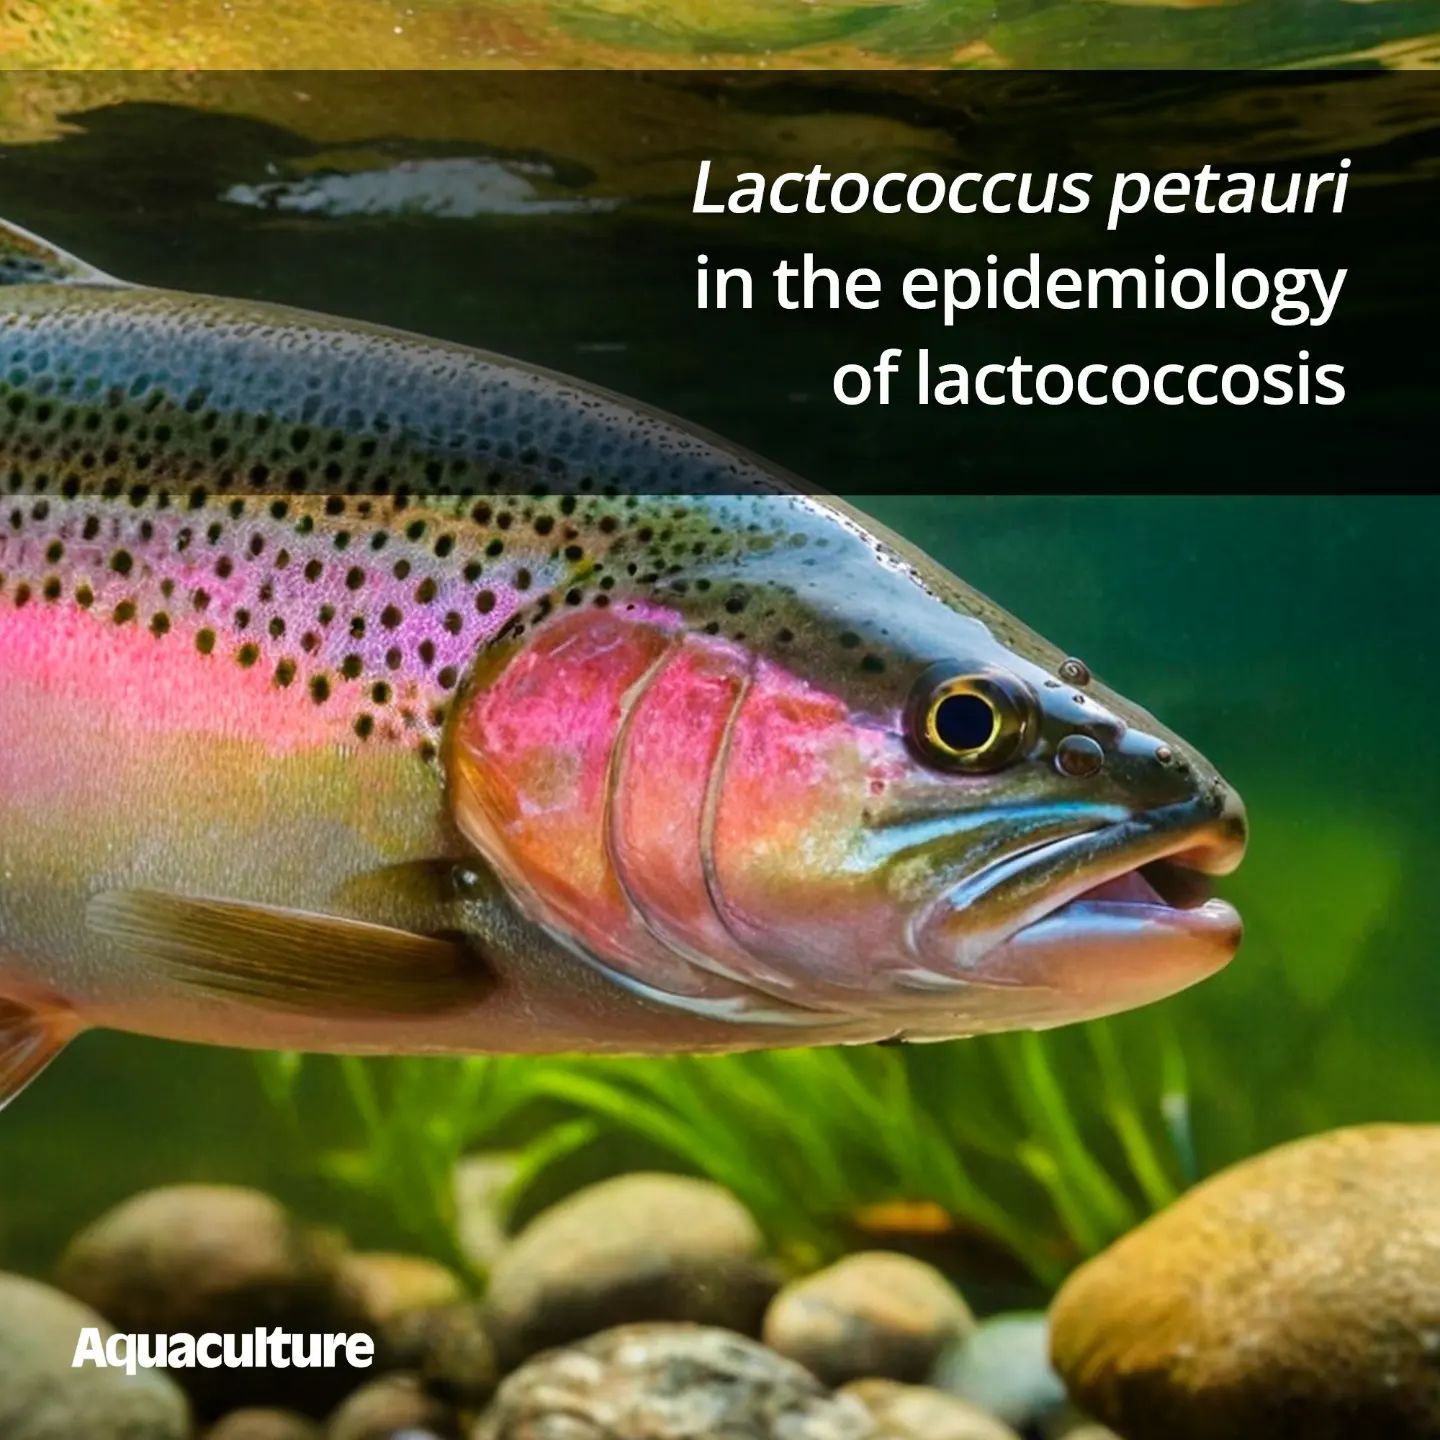 The association of Lactococcus petauri with lactococcosis is older than expected